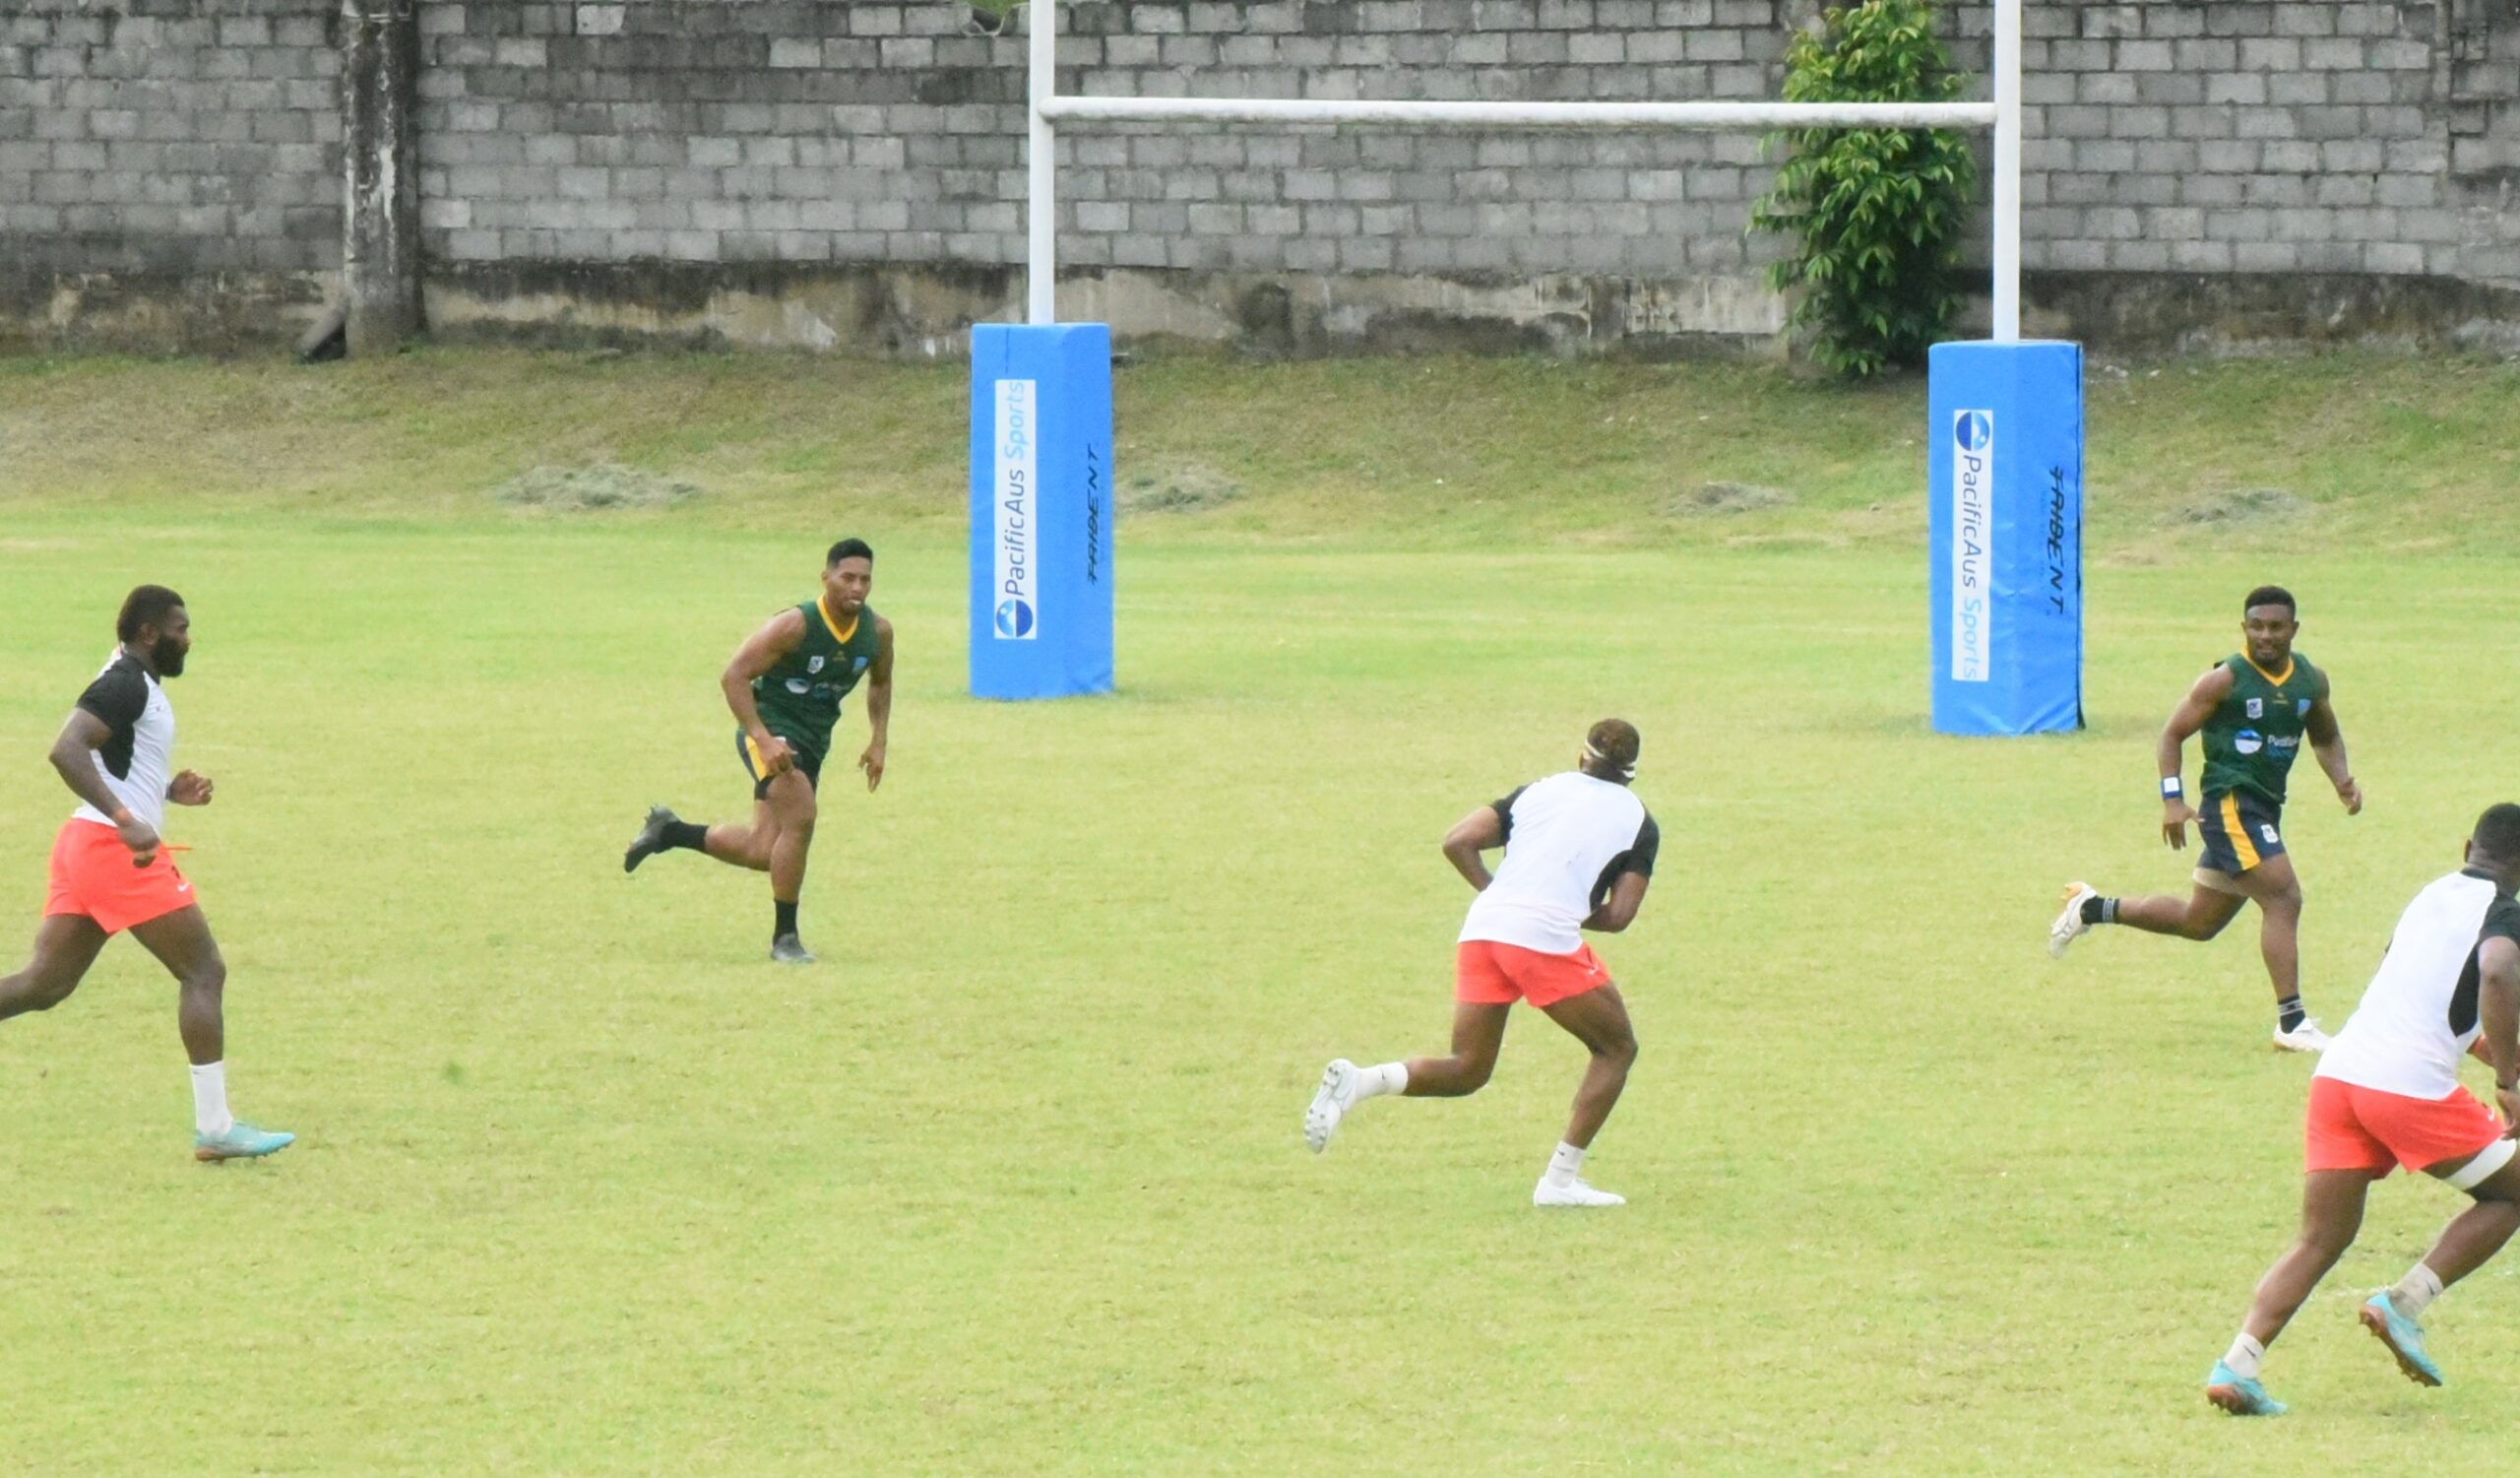 A rugby 7s training match